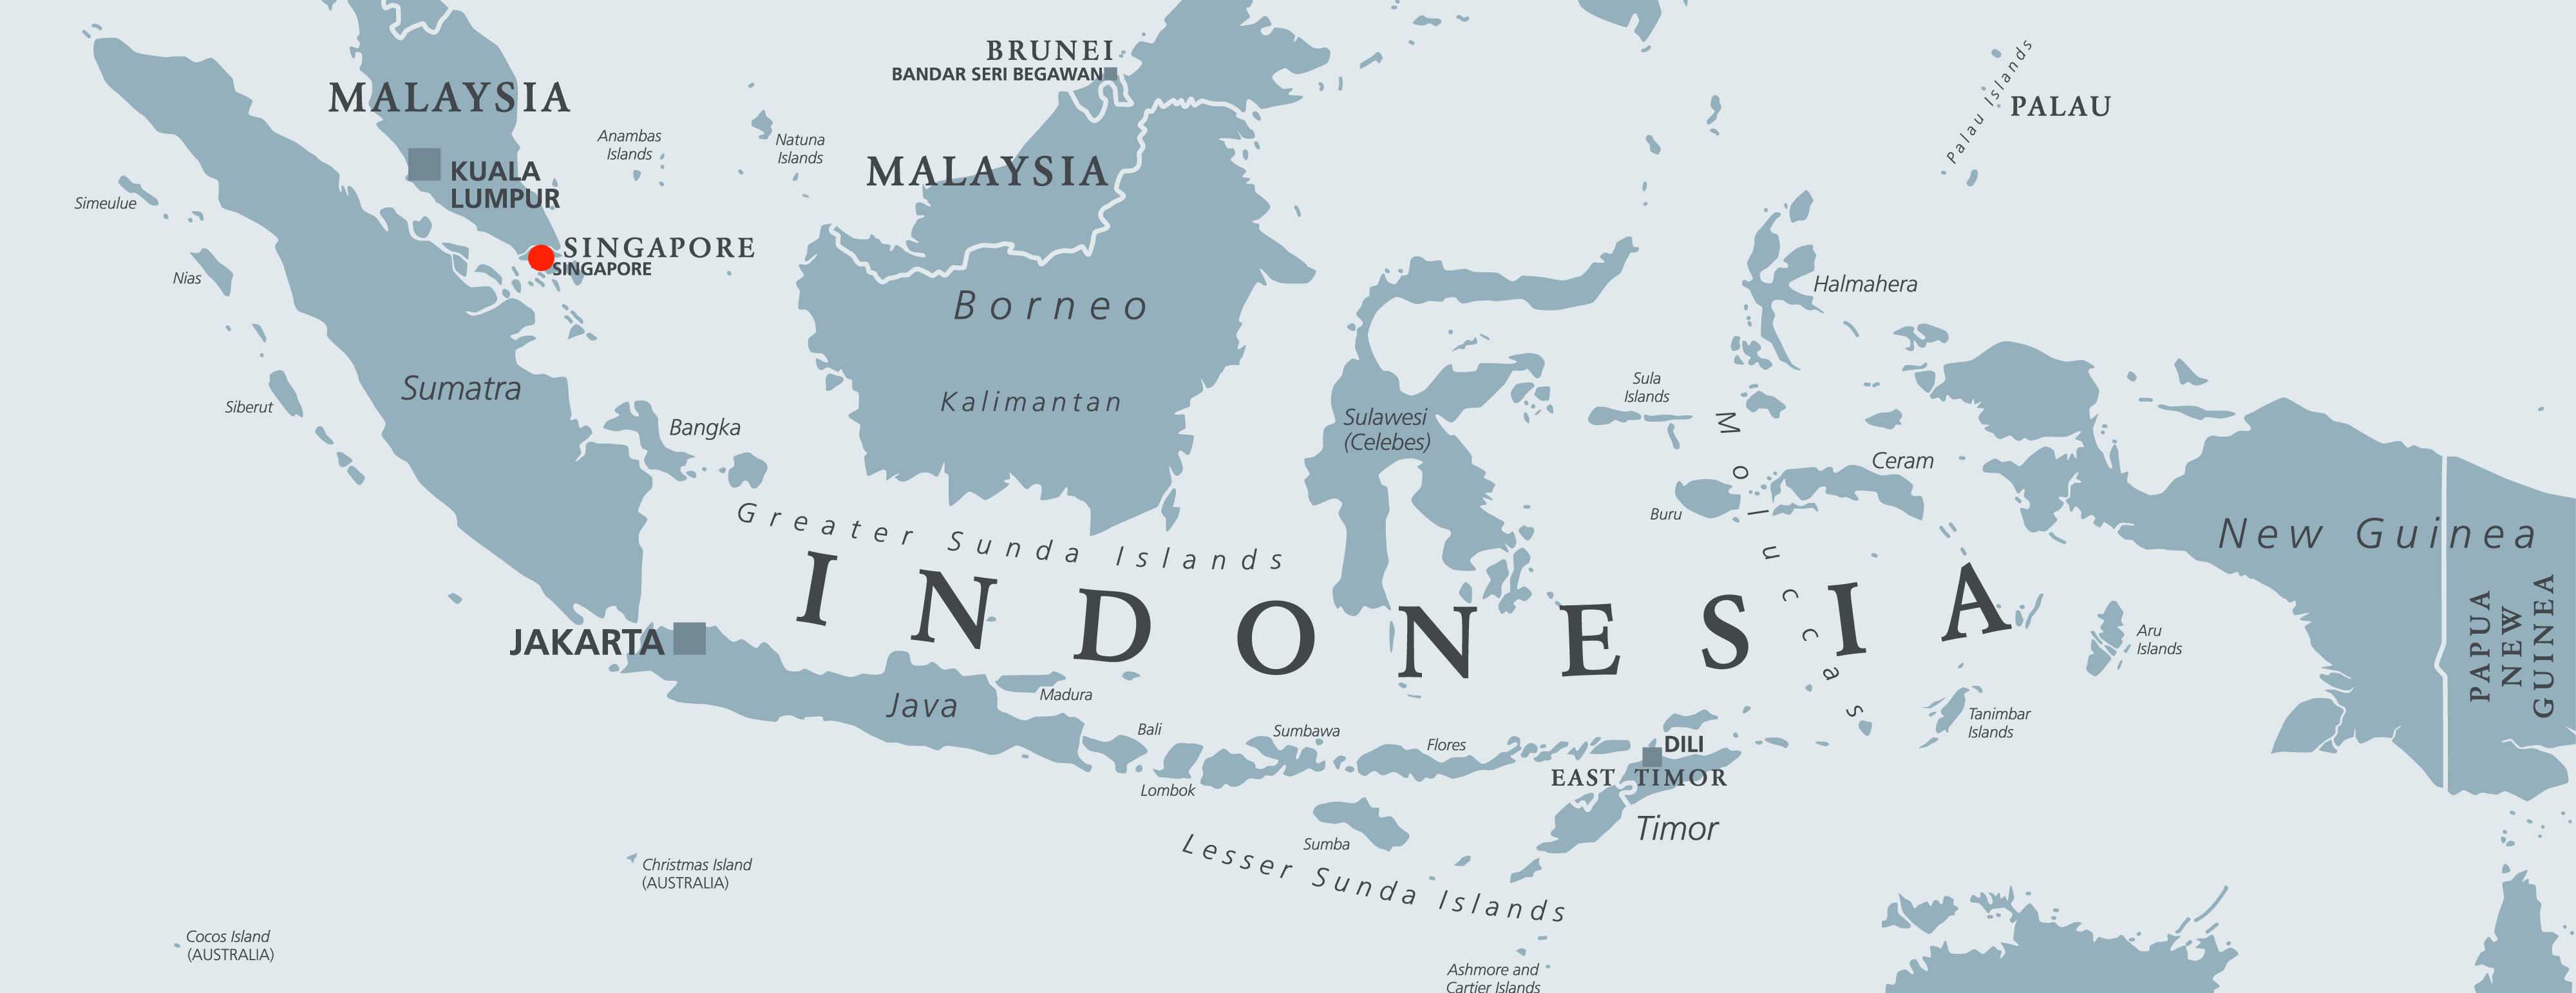 Indonesia political map